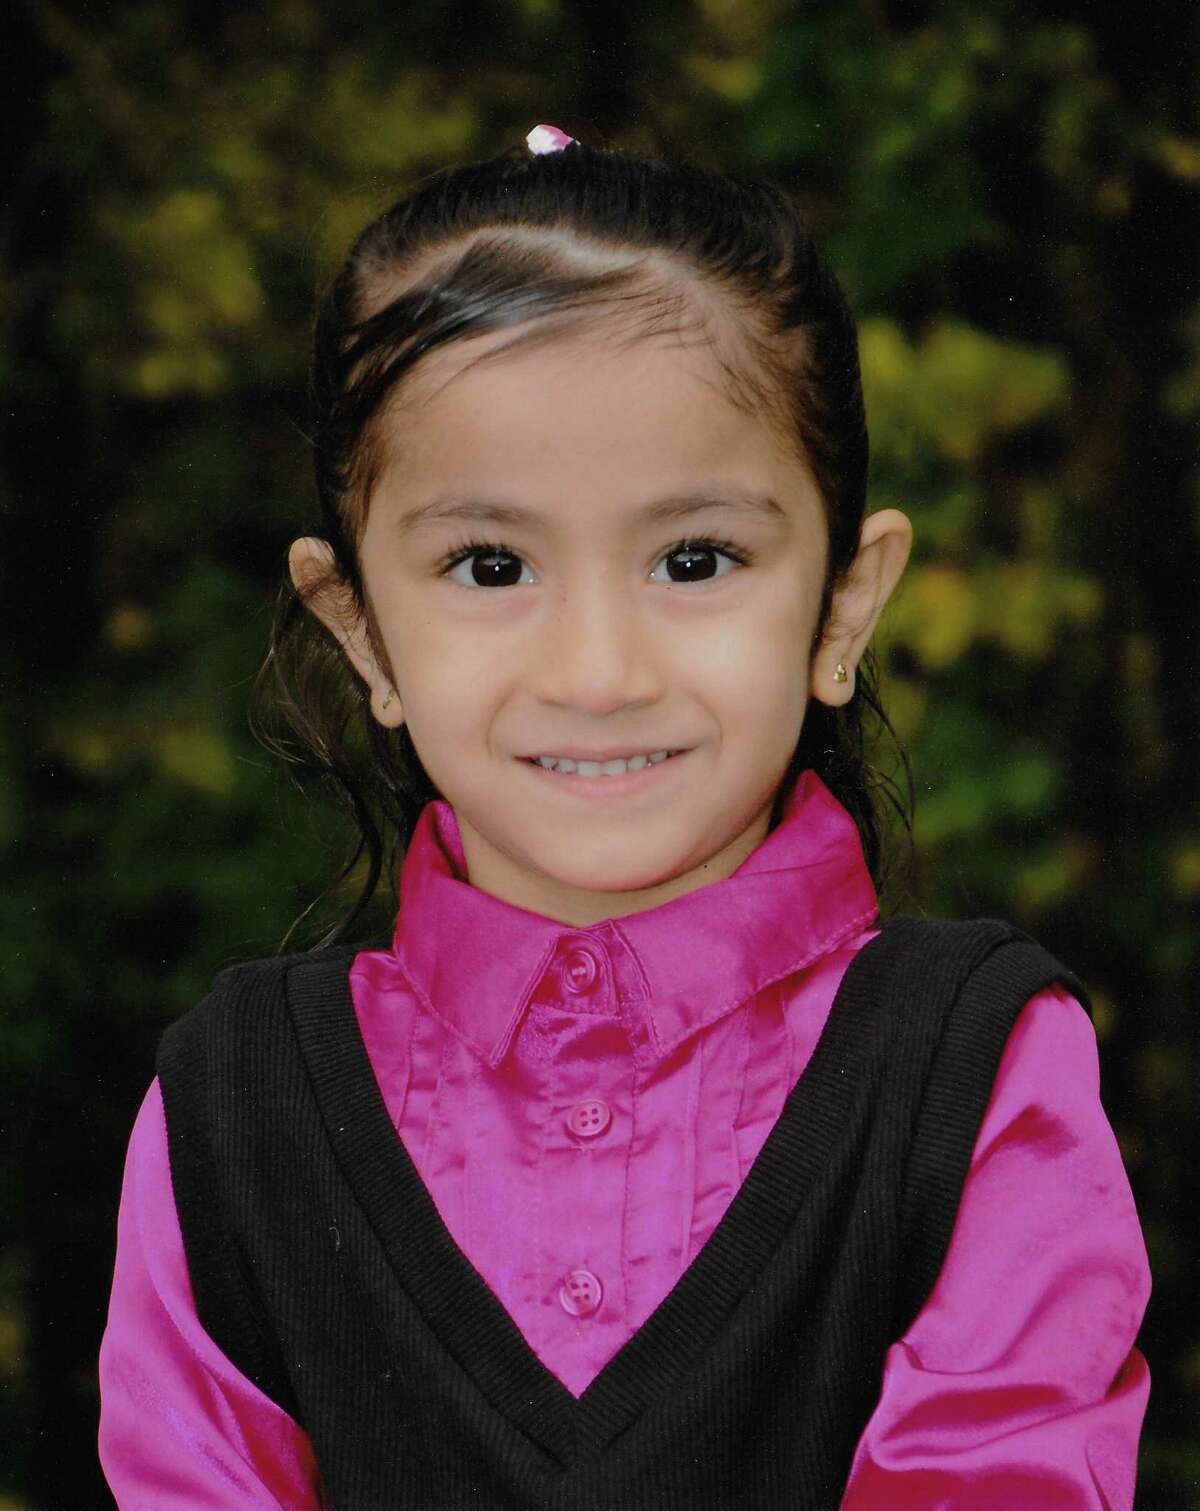 A photo of Mariam Azeez from when she was in kindergarten. She is now 15.